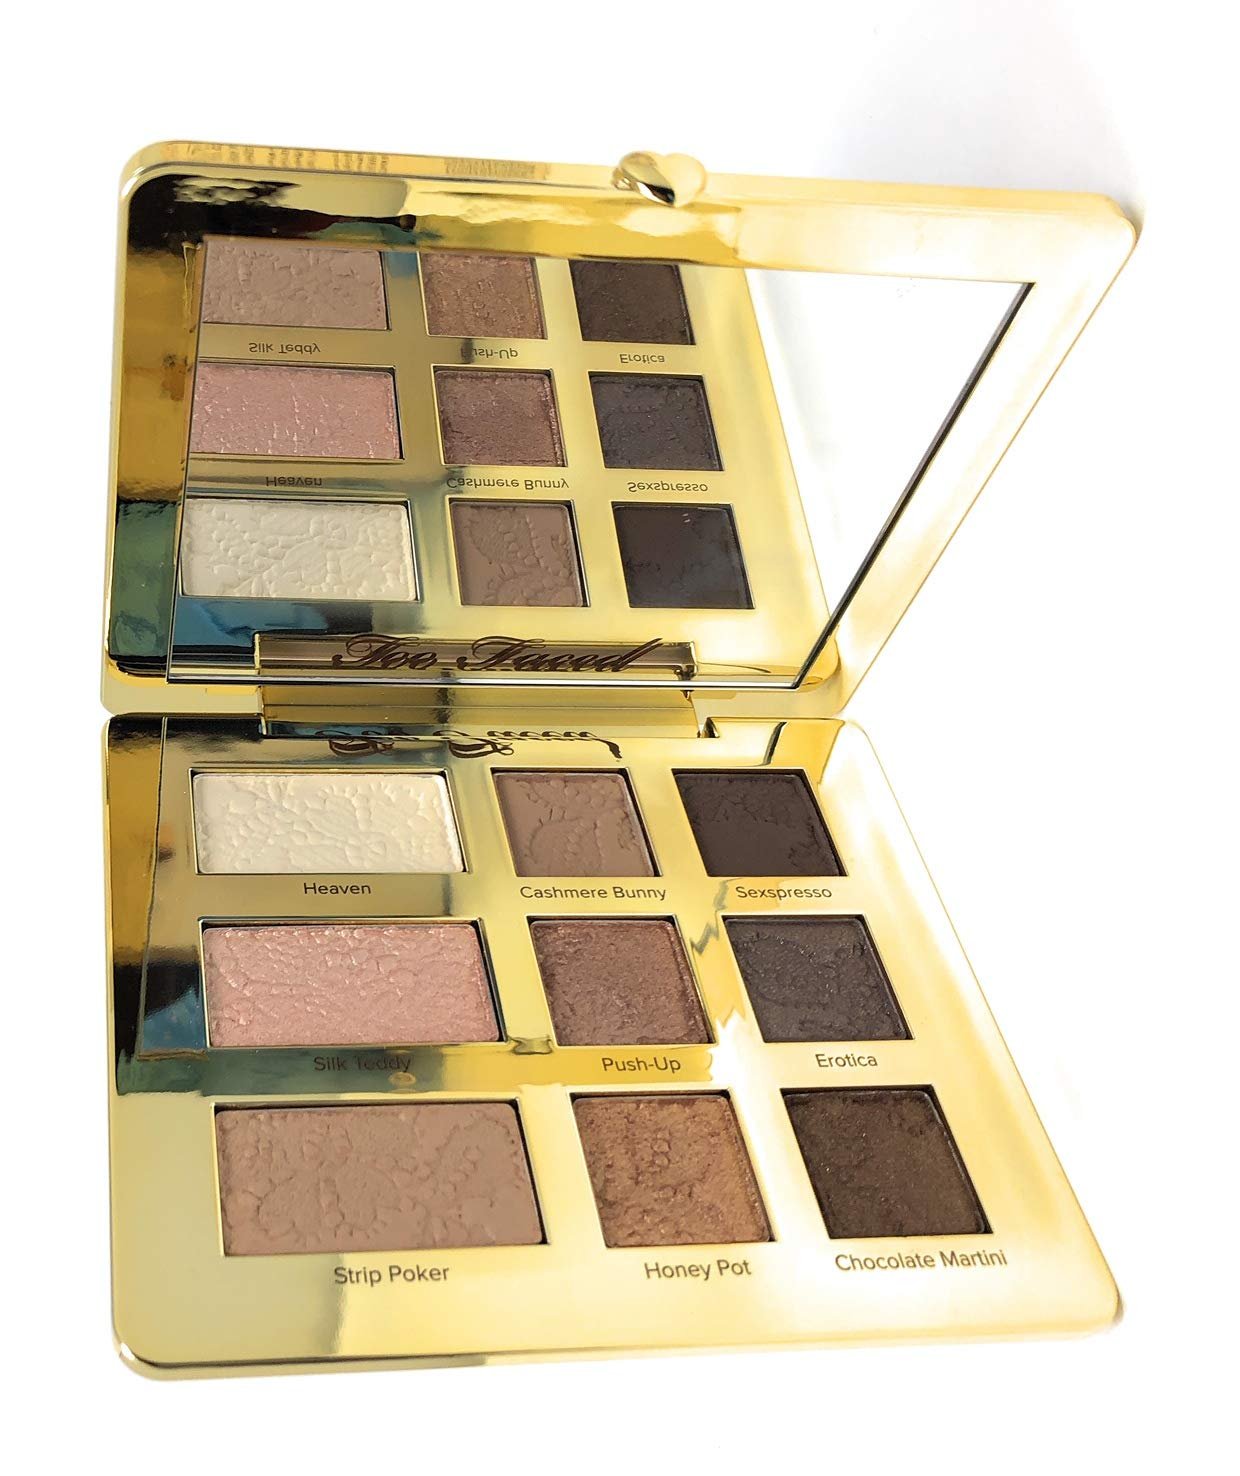 1 Too Faced Natural Eyes Neutral Eye Shadow Palette